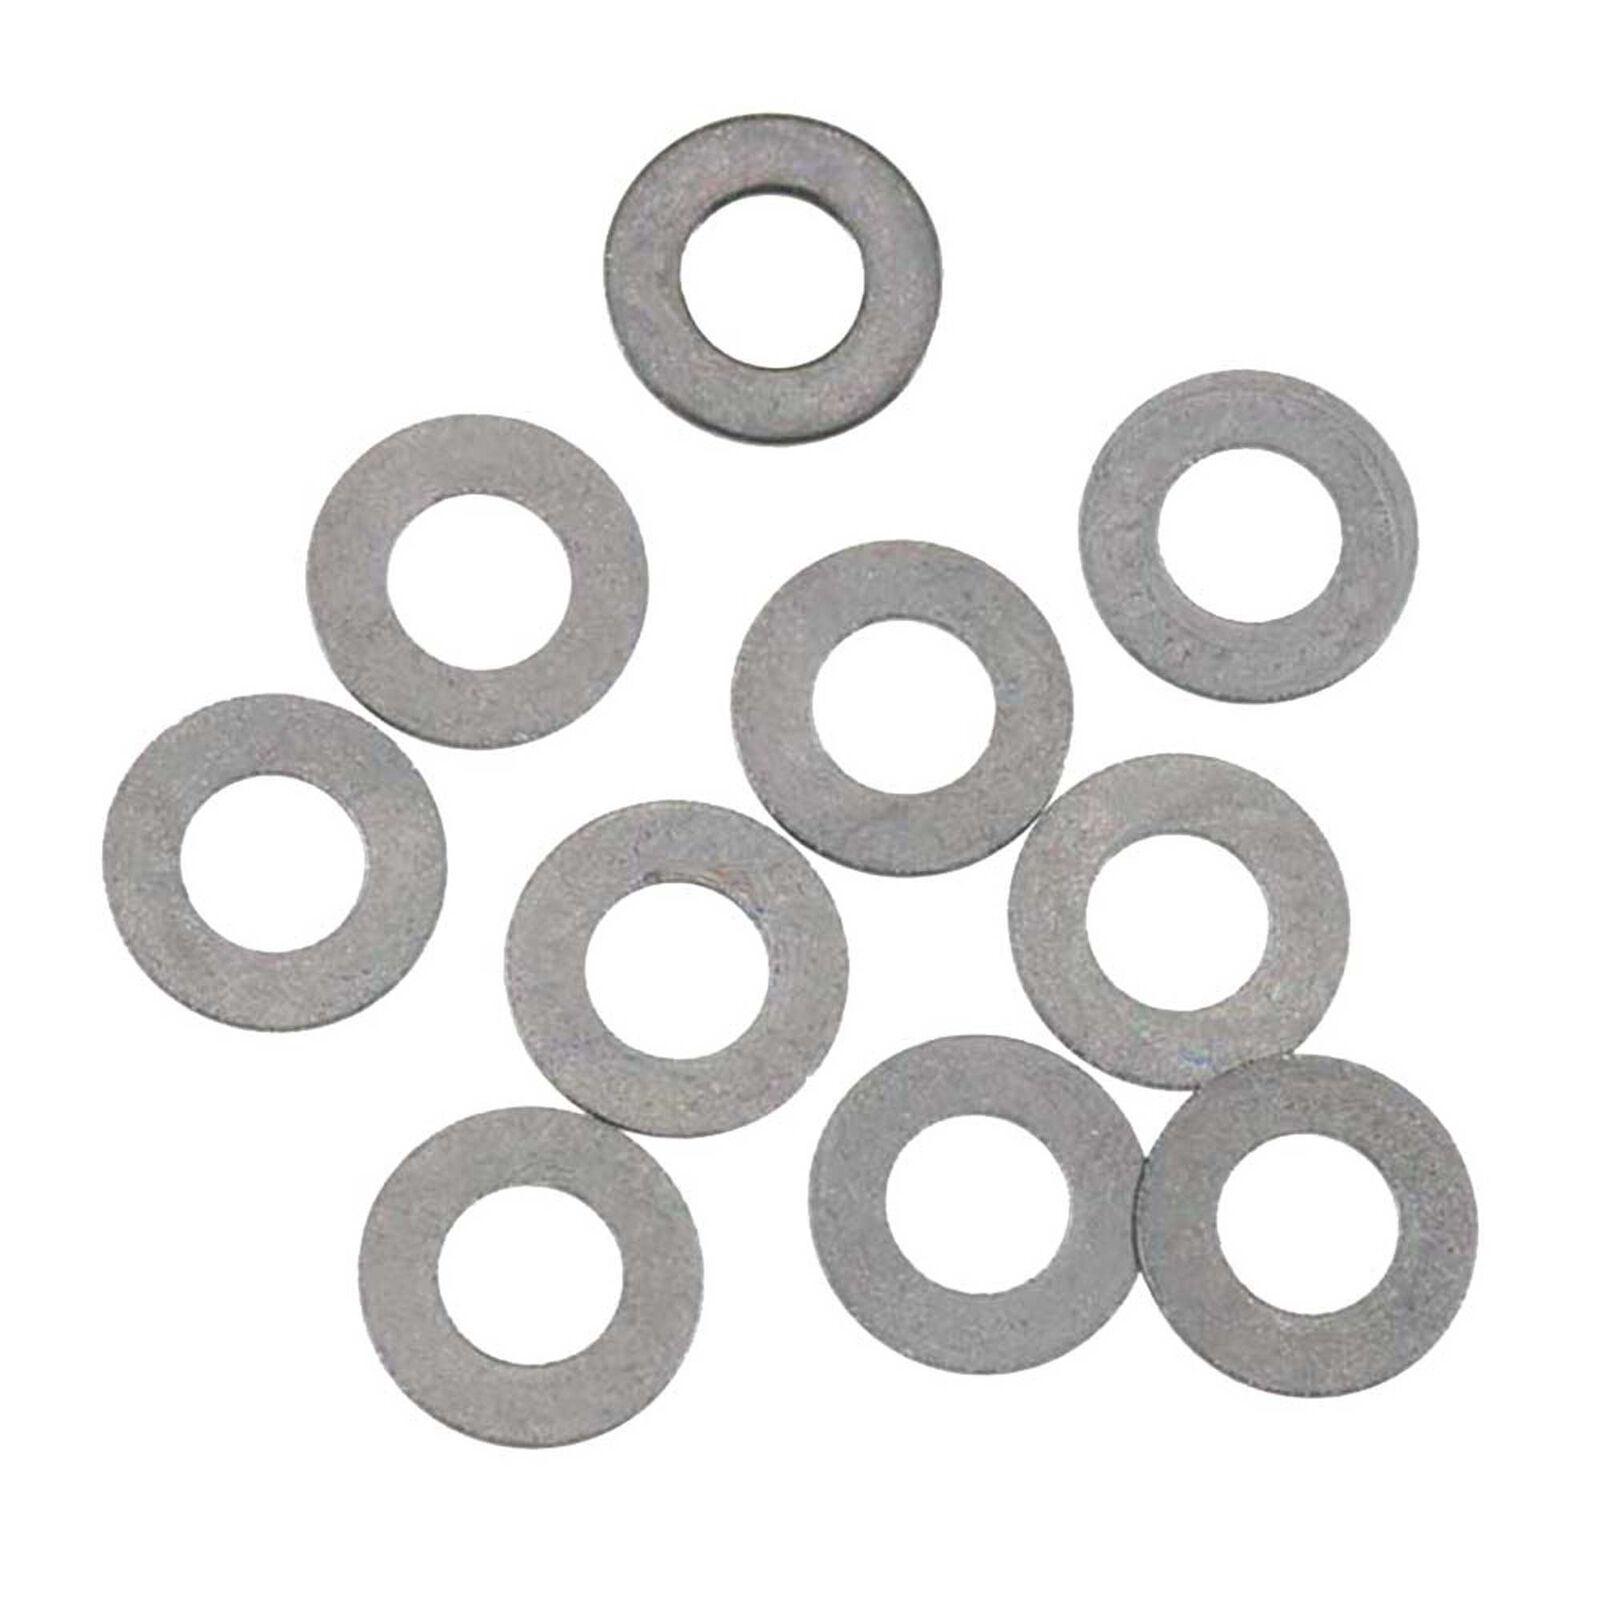 Washer 4x8x0.5mm (10)